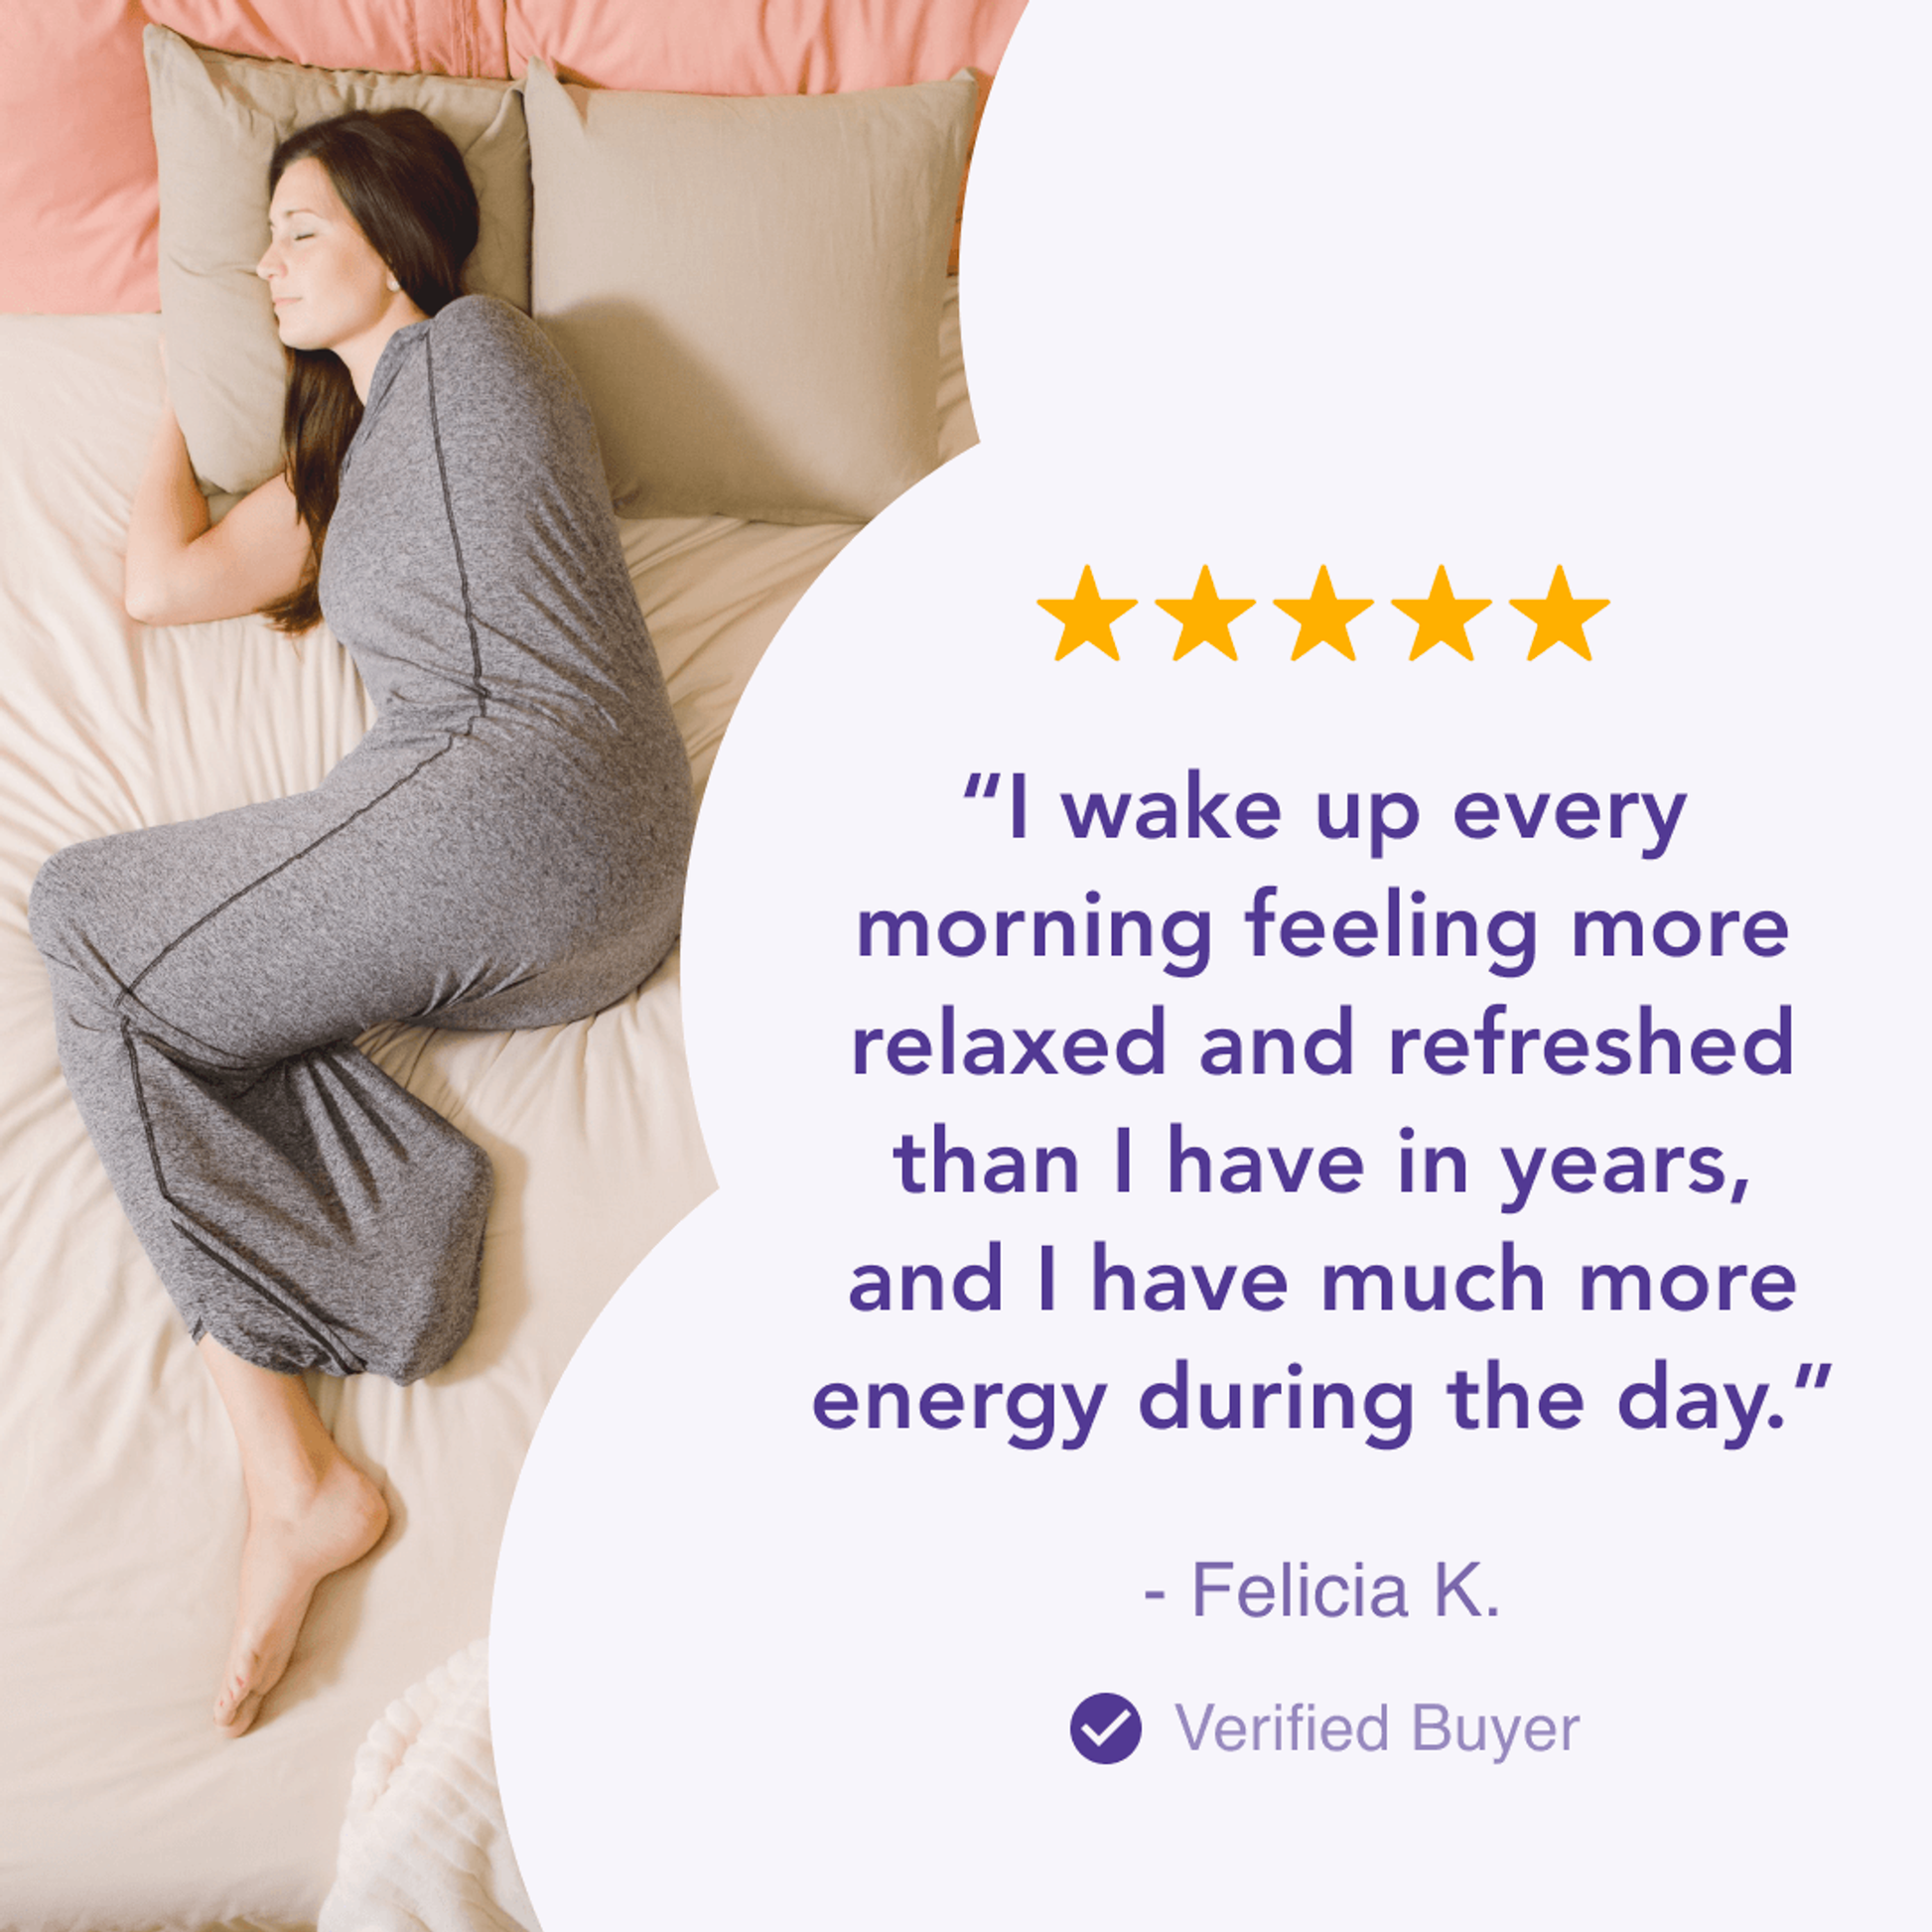 man in sleep pod in bed - 5 stars: "I wake up every morning, feeling more relaxed and refreshed than I have in years and I have much more energy during the day" felicia, verified buyer